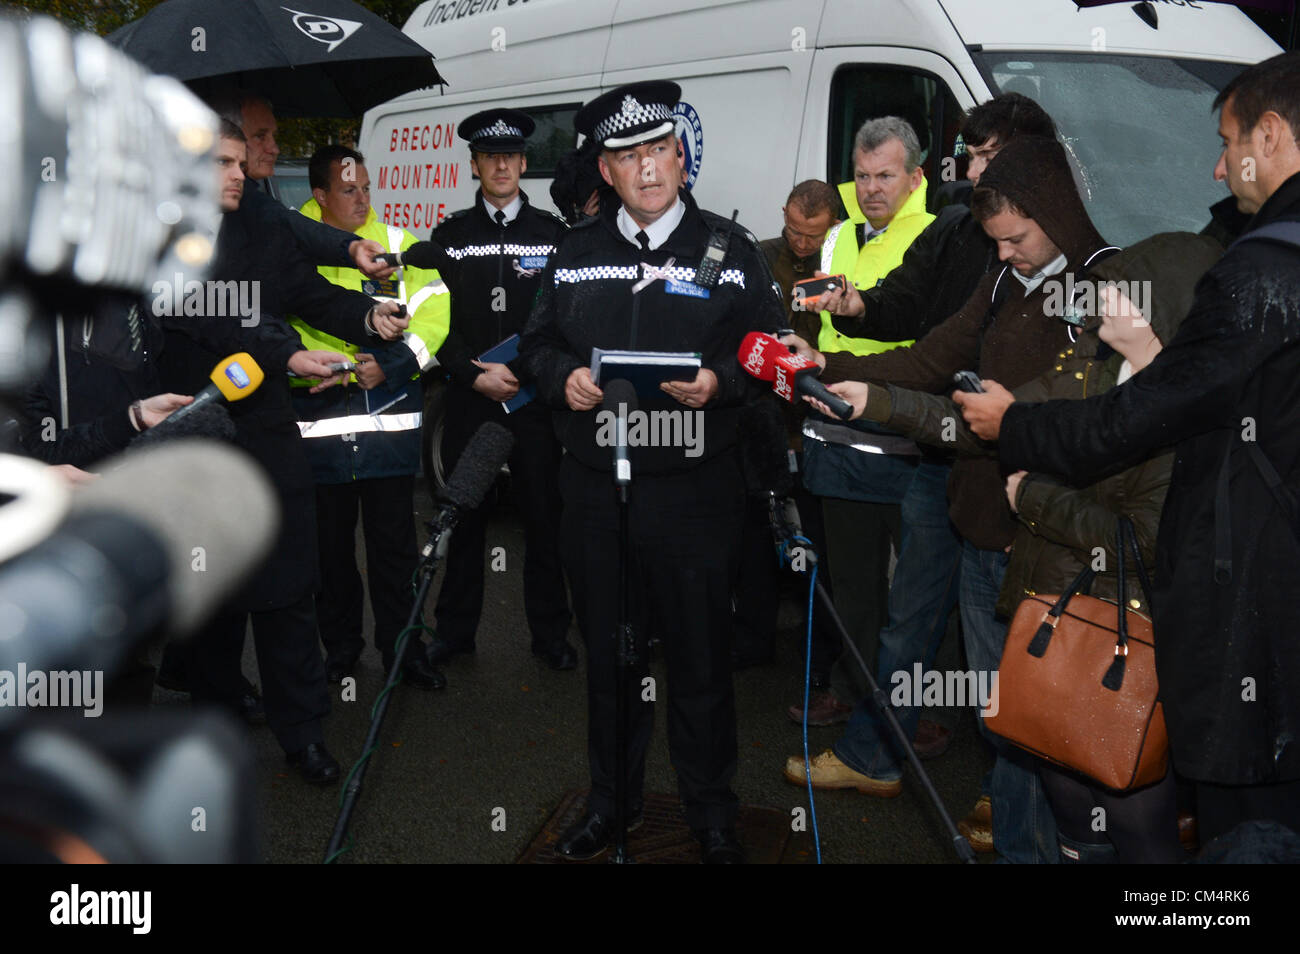 Machynlleth, Powys, Wales, UK. 4th October 2012. Superintendent IAN JOHN gives a press conference in the rain outside the leisure centre that has been the focus for community volunteers and rescue workers in the search for missing 5 year old girl APRIL JONES. On the fourth night after her abduction police are redoubling their efforts to find the child.  photo Credit: keith morris/Alamy Live News Stock Photo